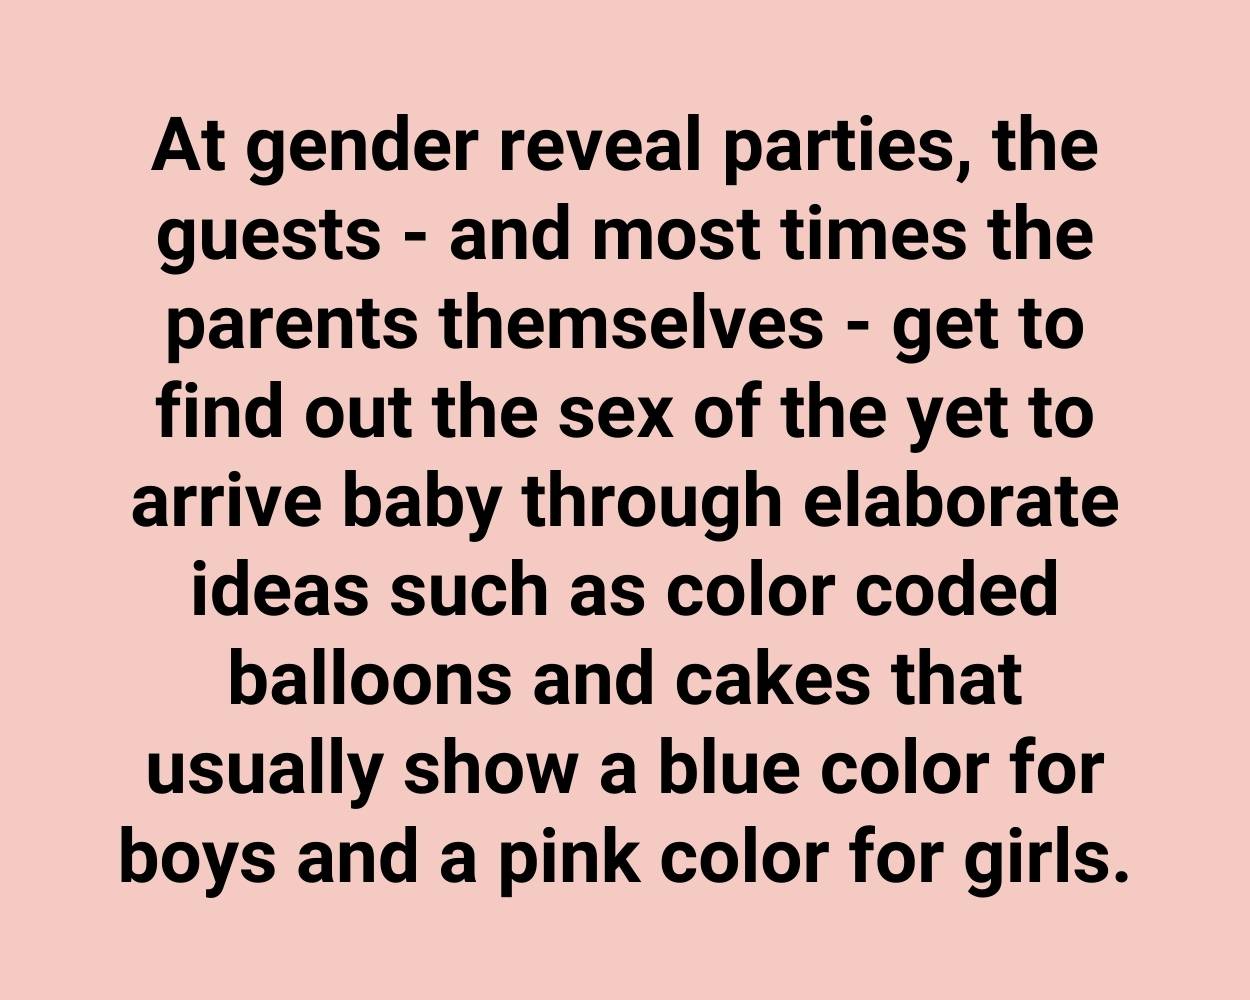 At gender reveal parties, the guests - and most times the parents themselves - get to find out the sex of the yet to arrive baby through elaborate ideas such as color coded balloons and cakes that usually show a blue color for boys and a pink color for girls.